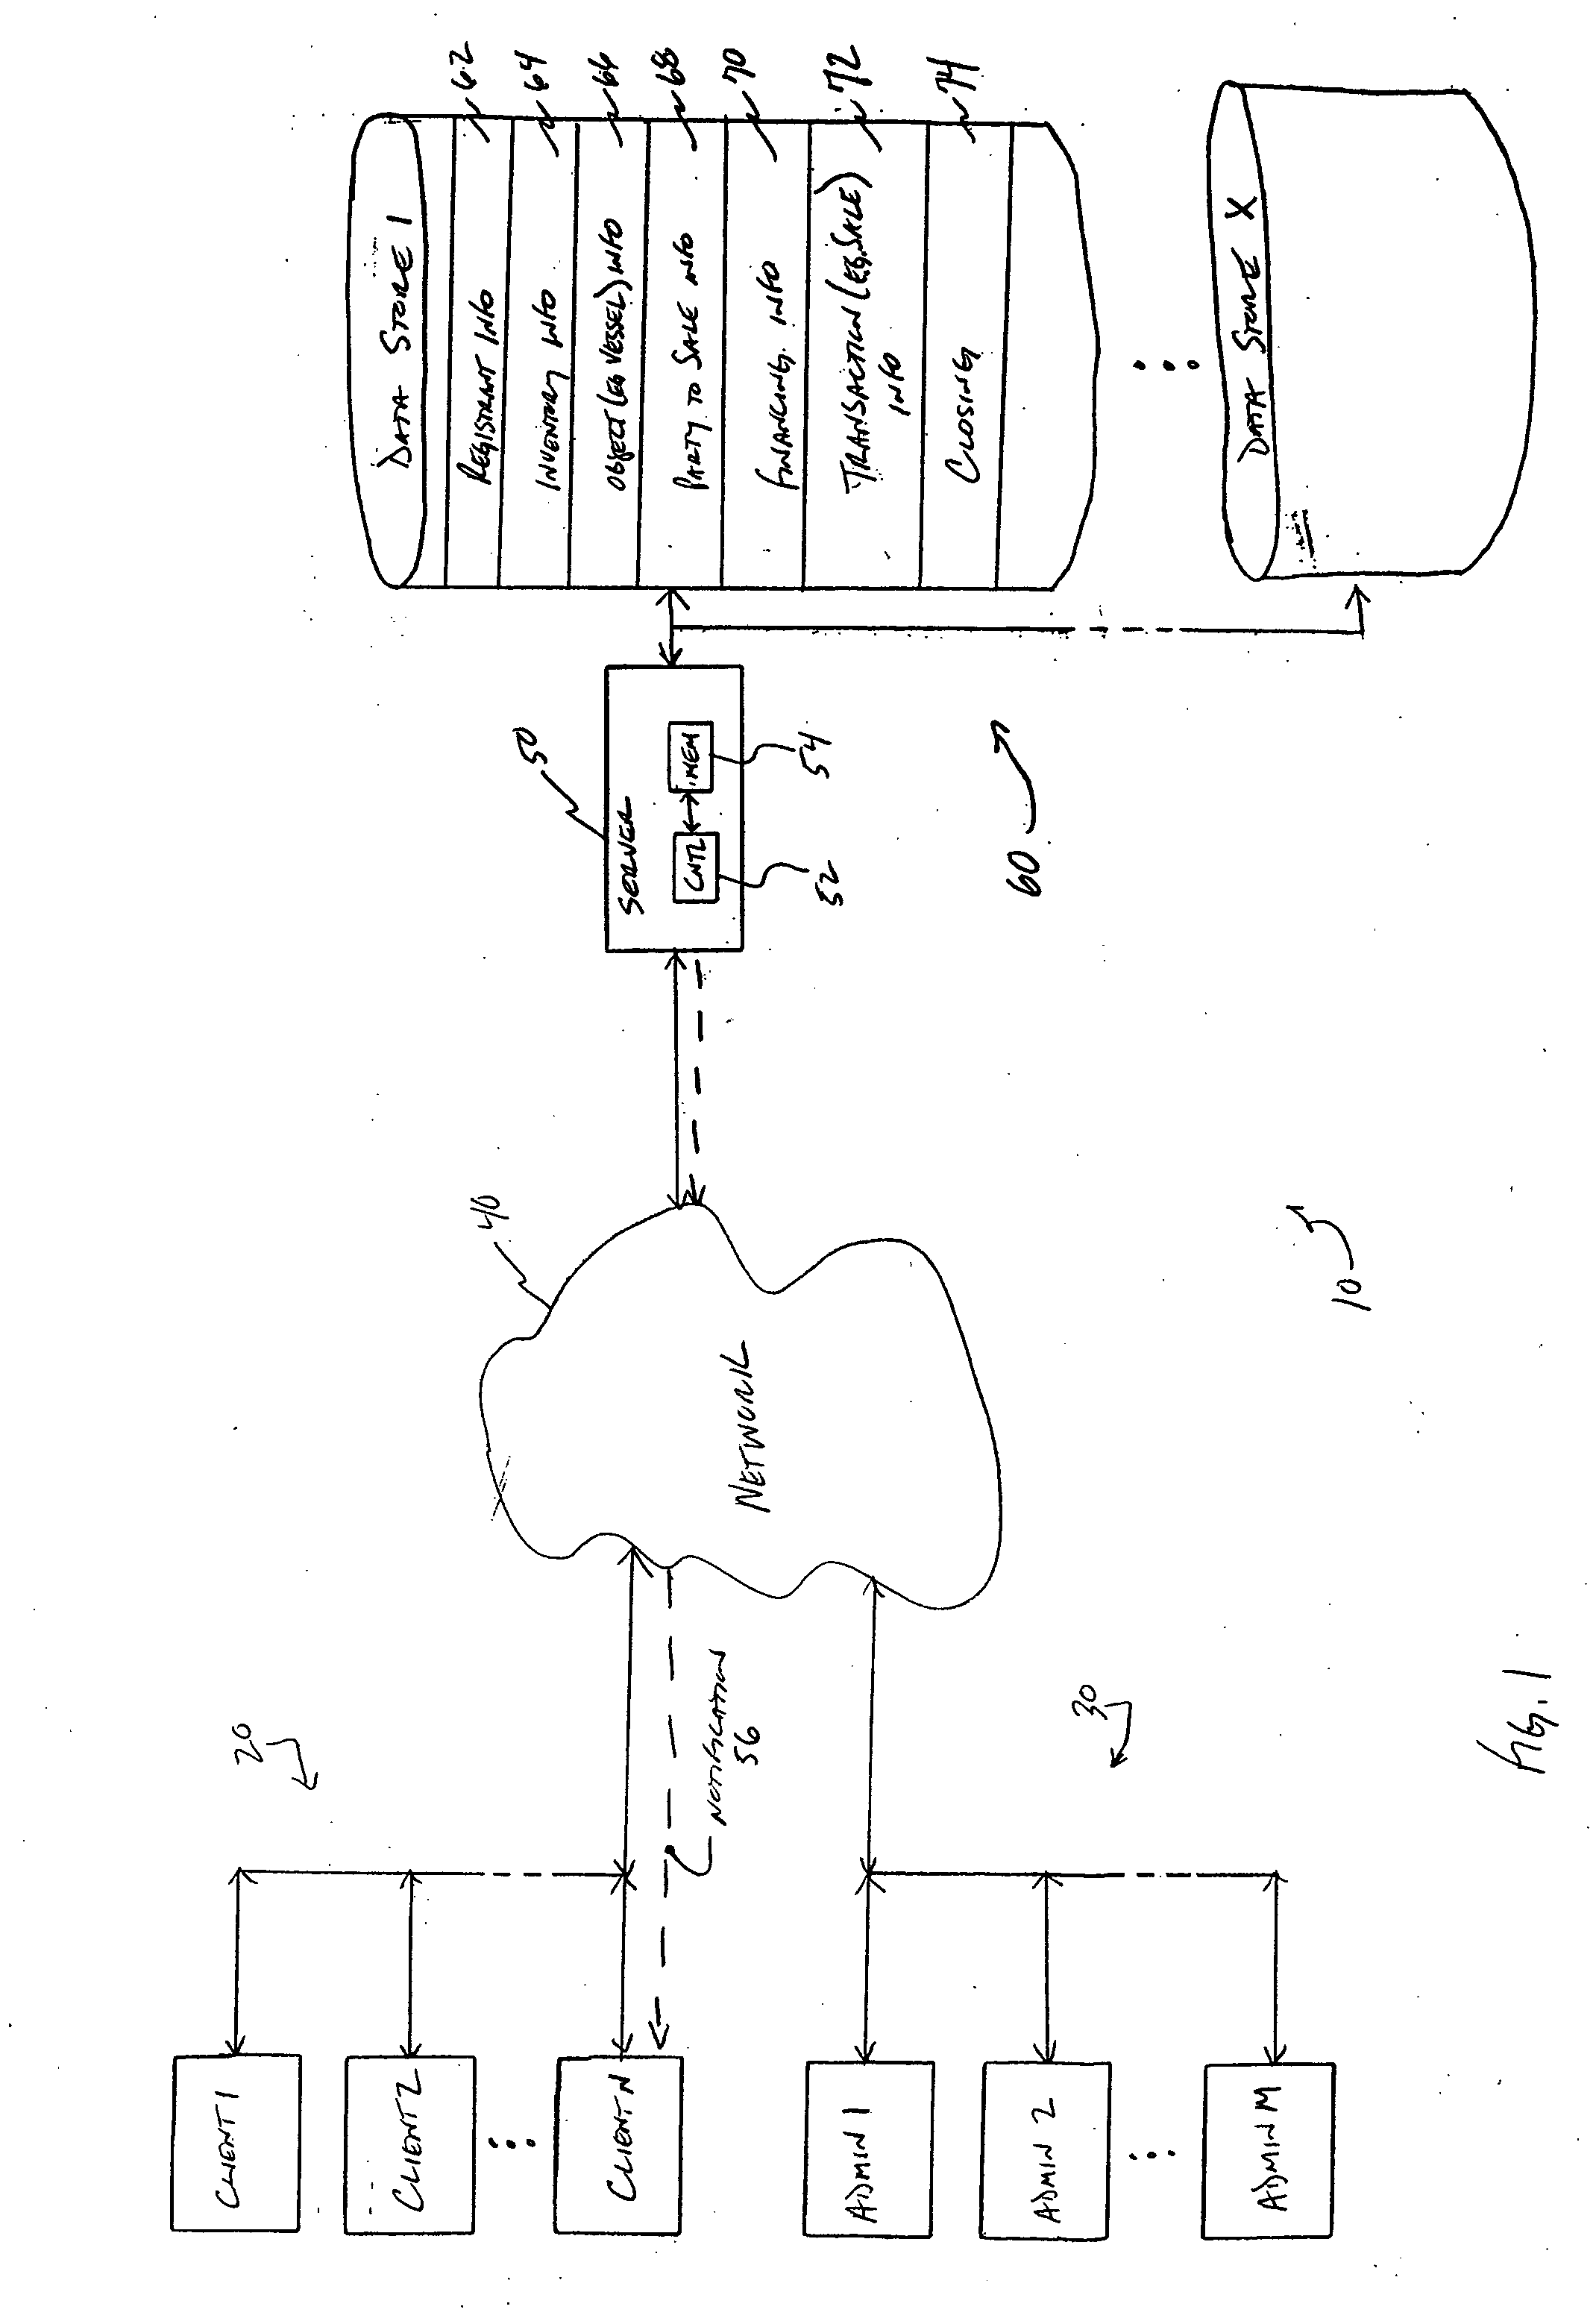 System and method for monitoring and conducting transactions of objects of value